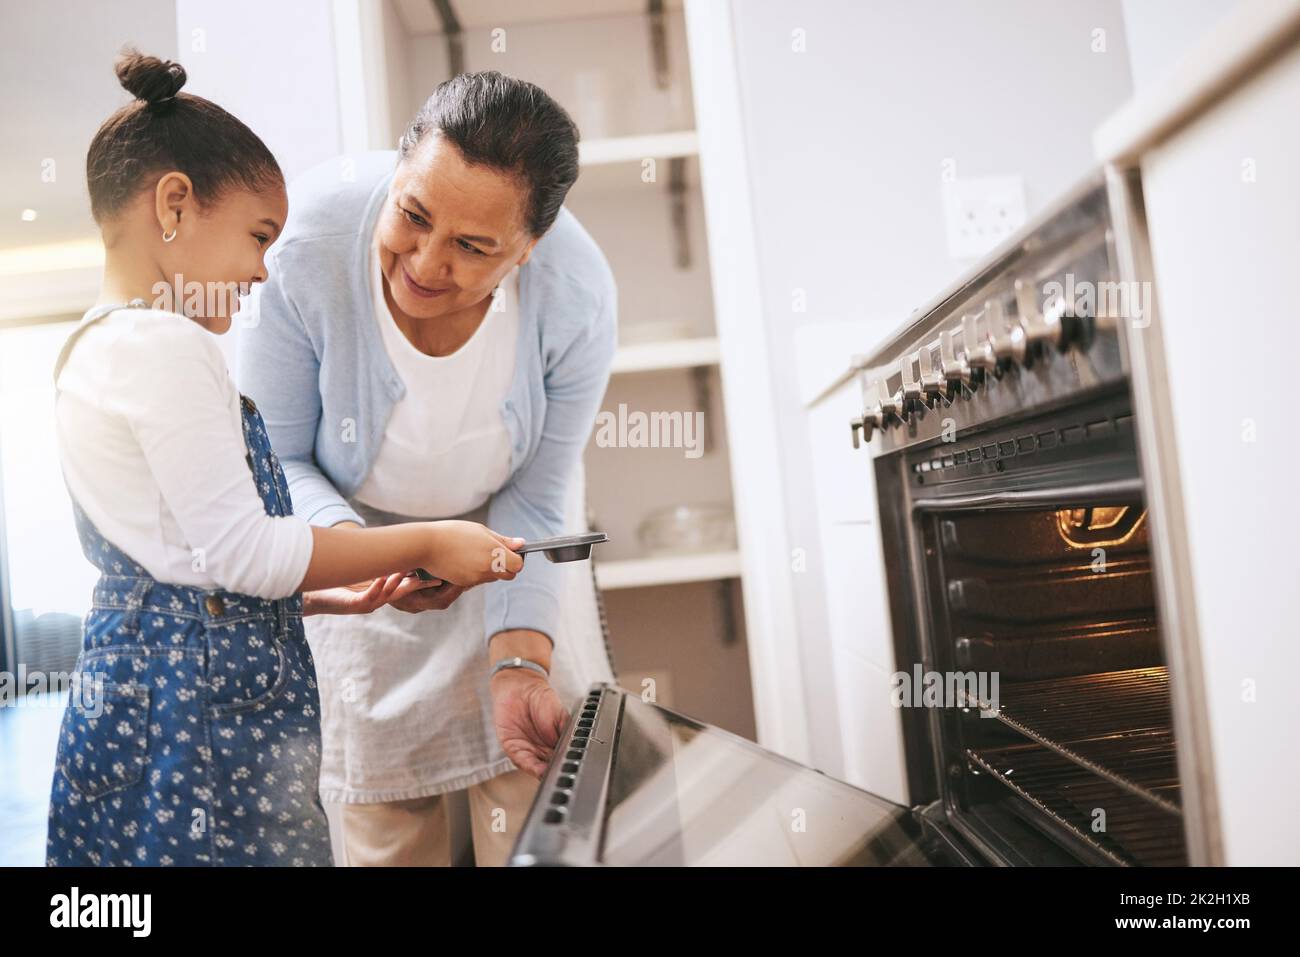 Dont get too close. Shot of a mature woman helping her grandchild safely open the oven at home. Stock Photo